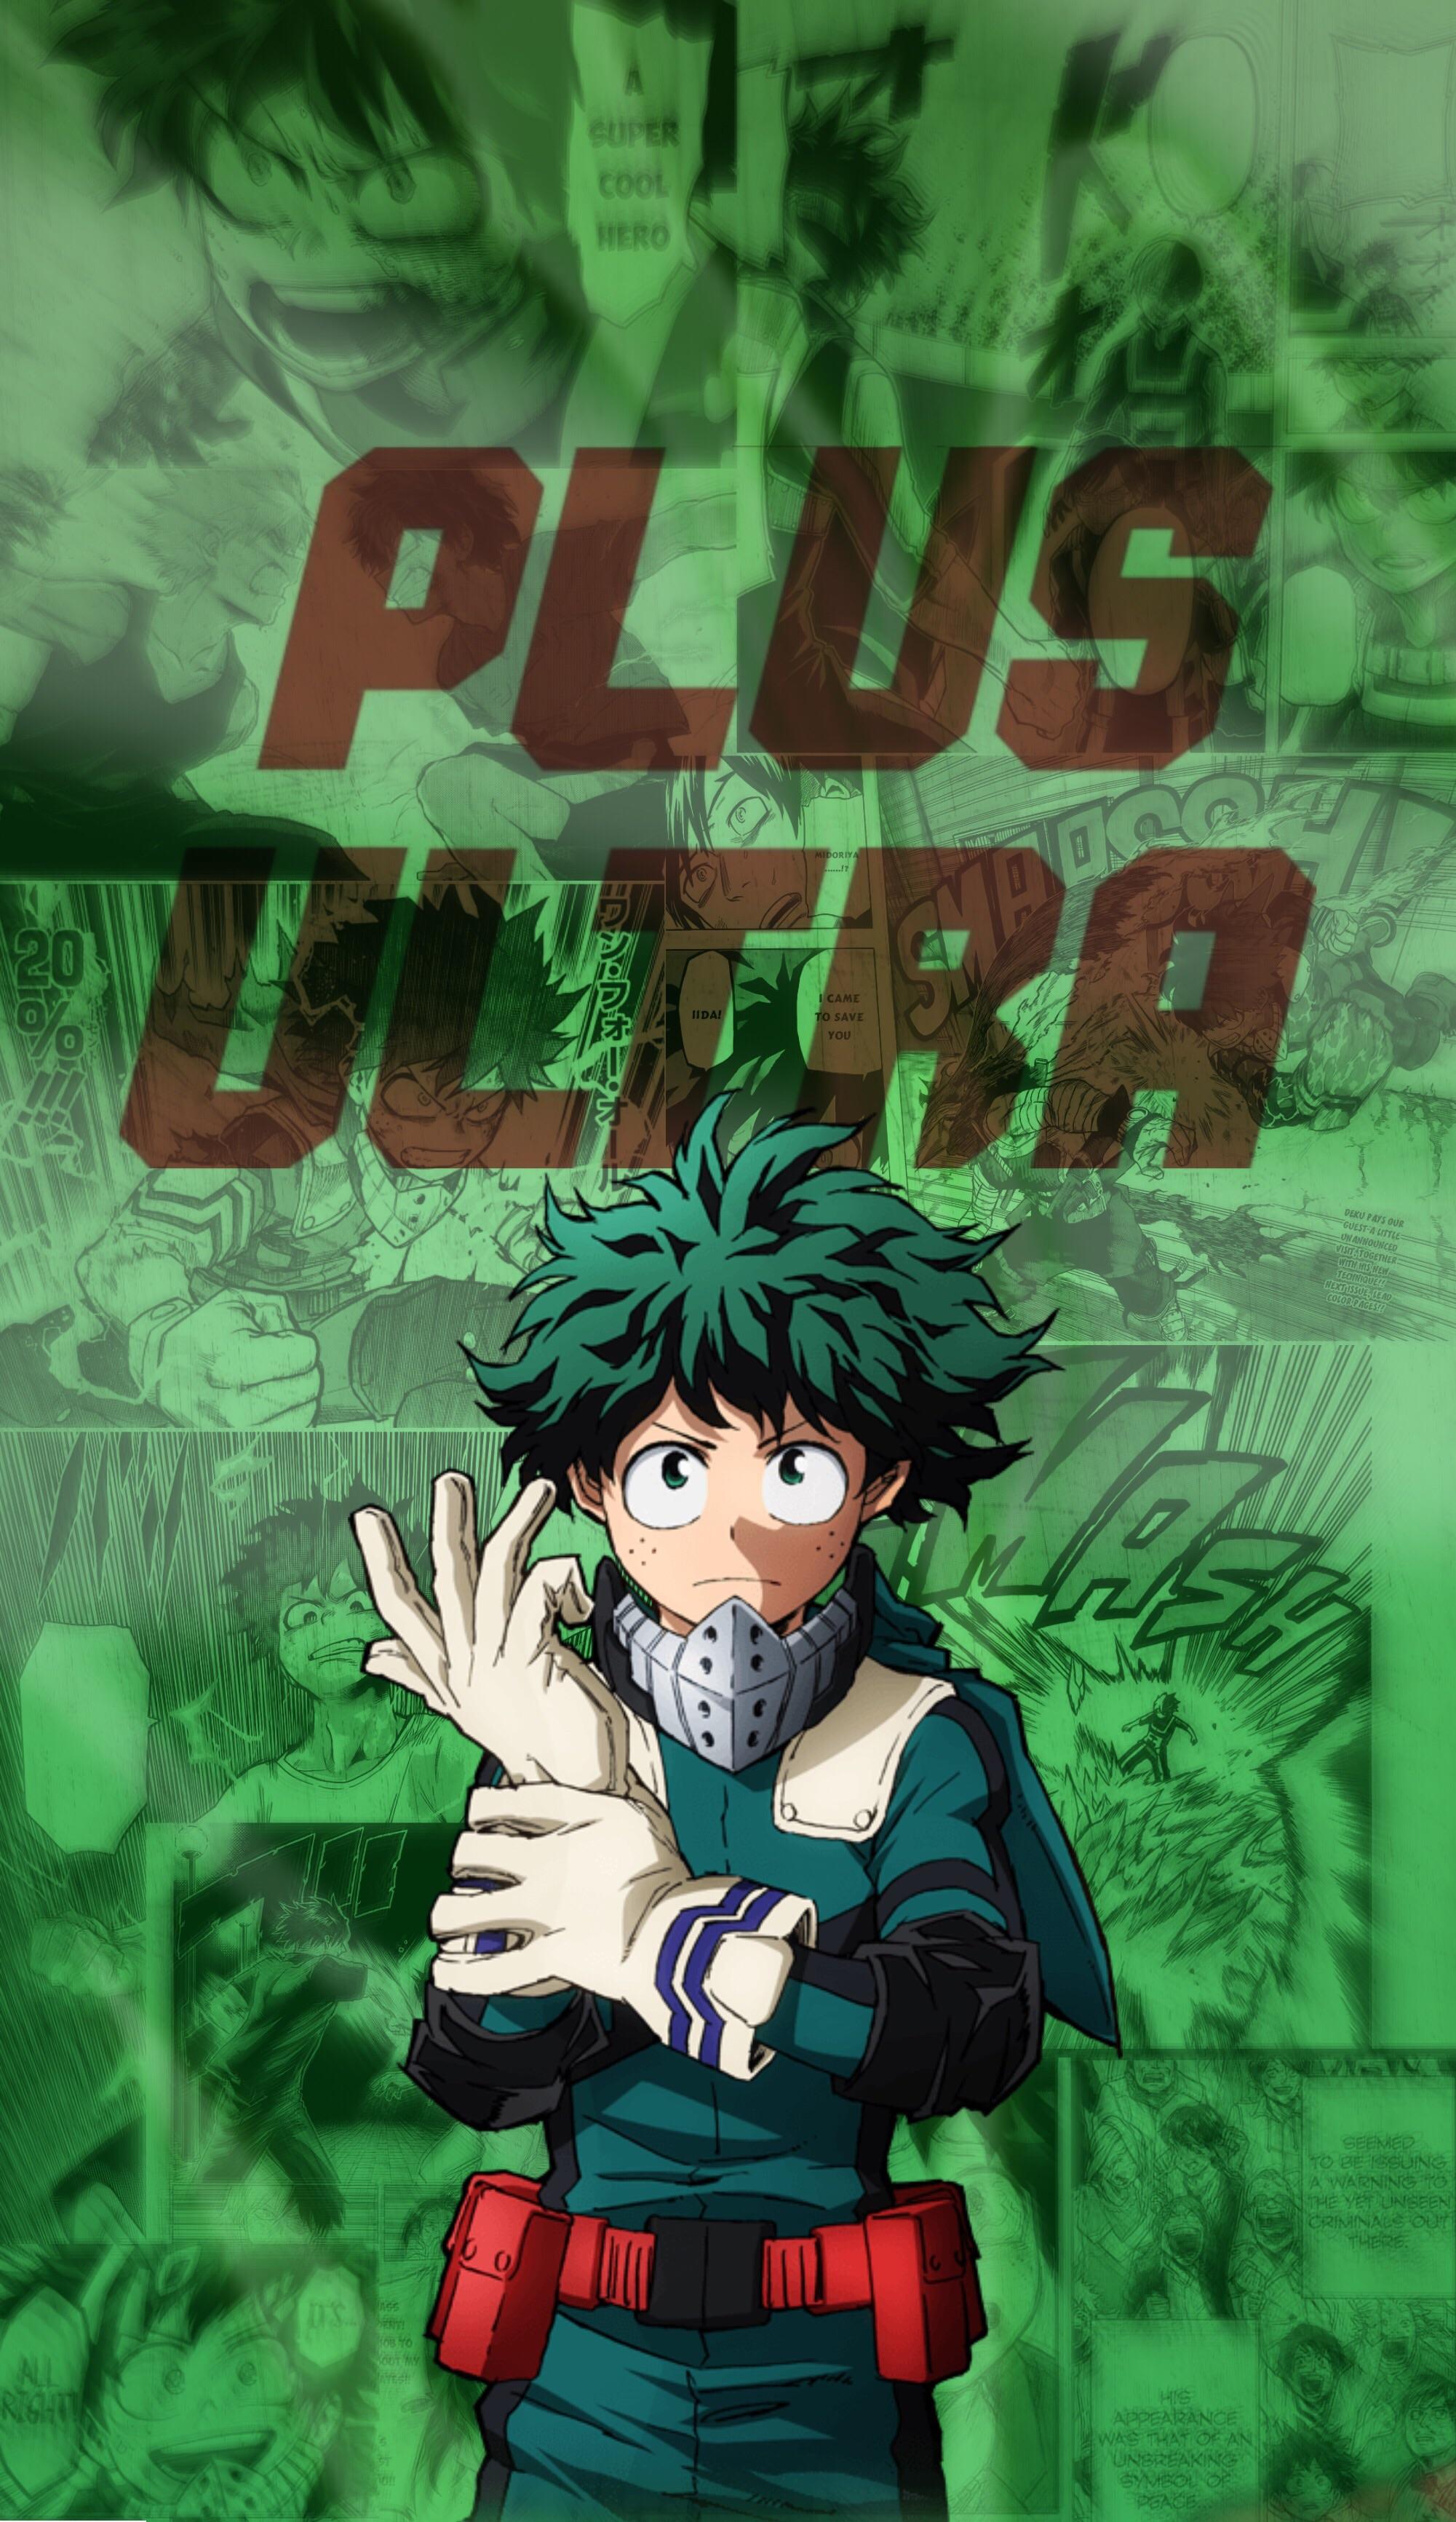 My Hero Academia wallpaper for mobile devices! Credit to the artist - Deku